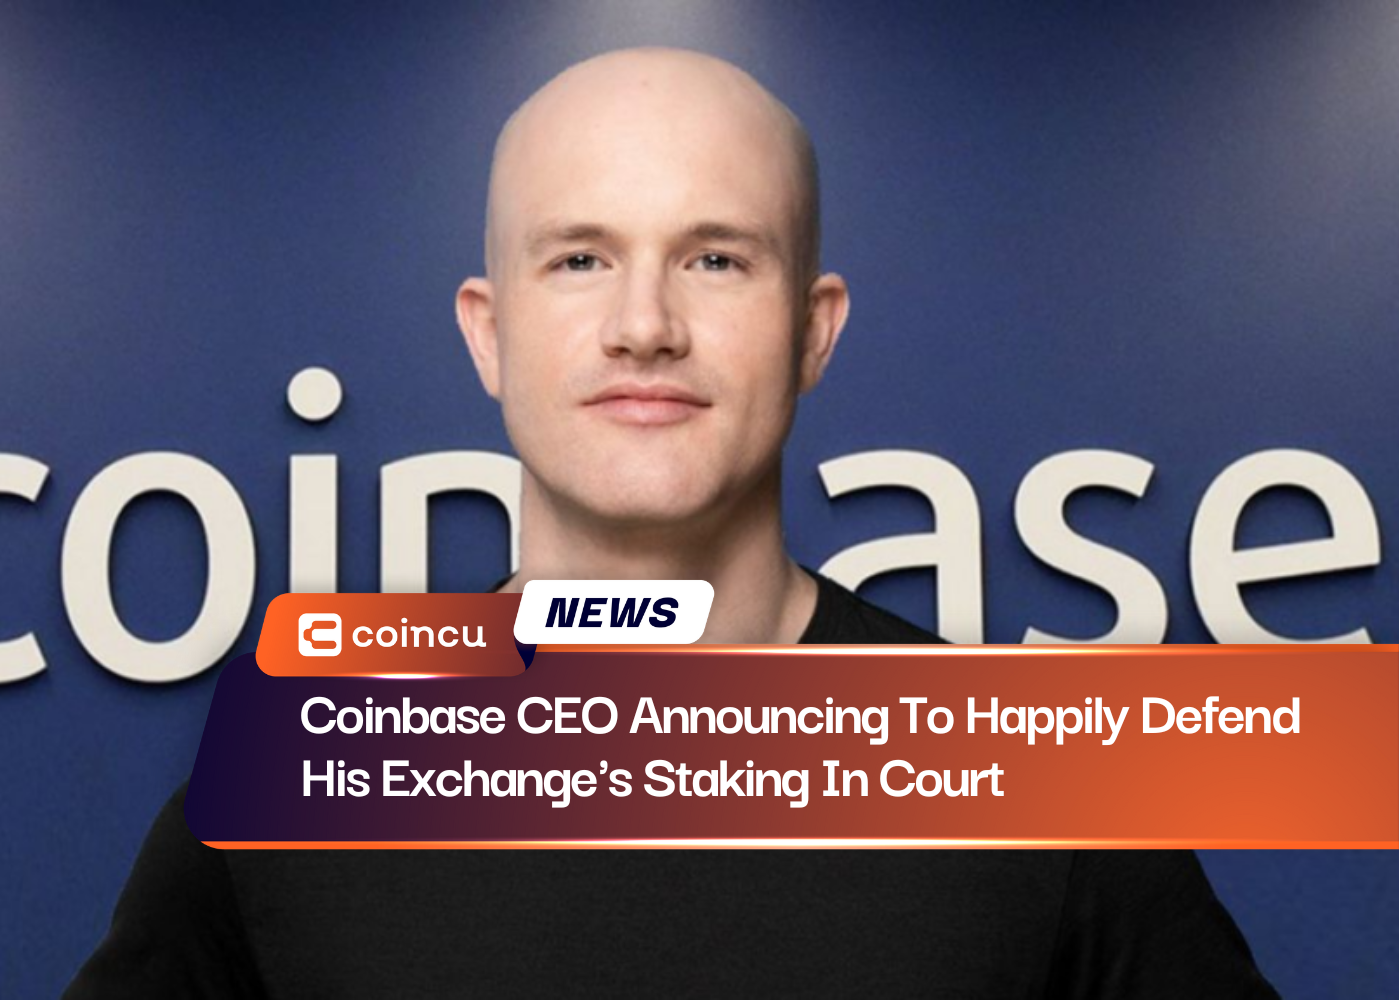 Coinbase CEO Announcing To Happily Defend His Exchange's Staking In Court